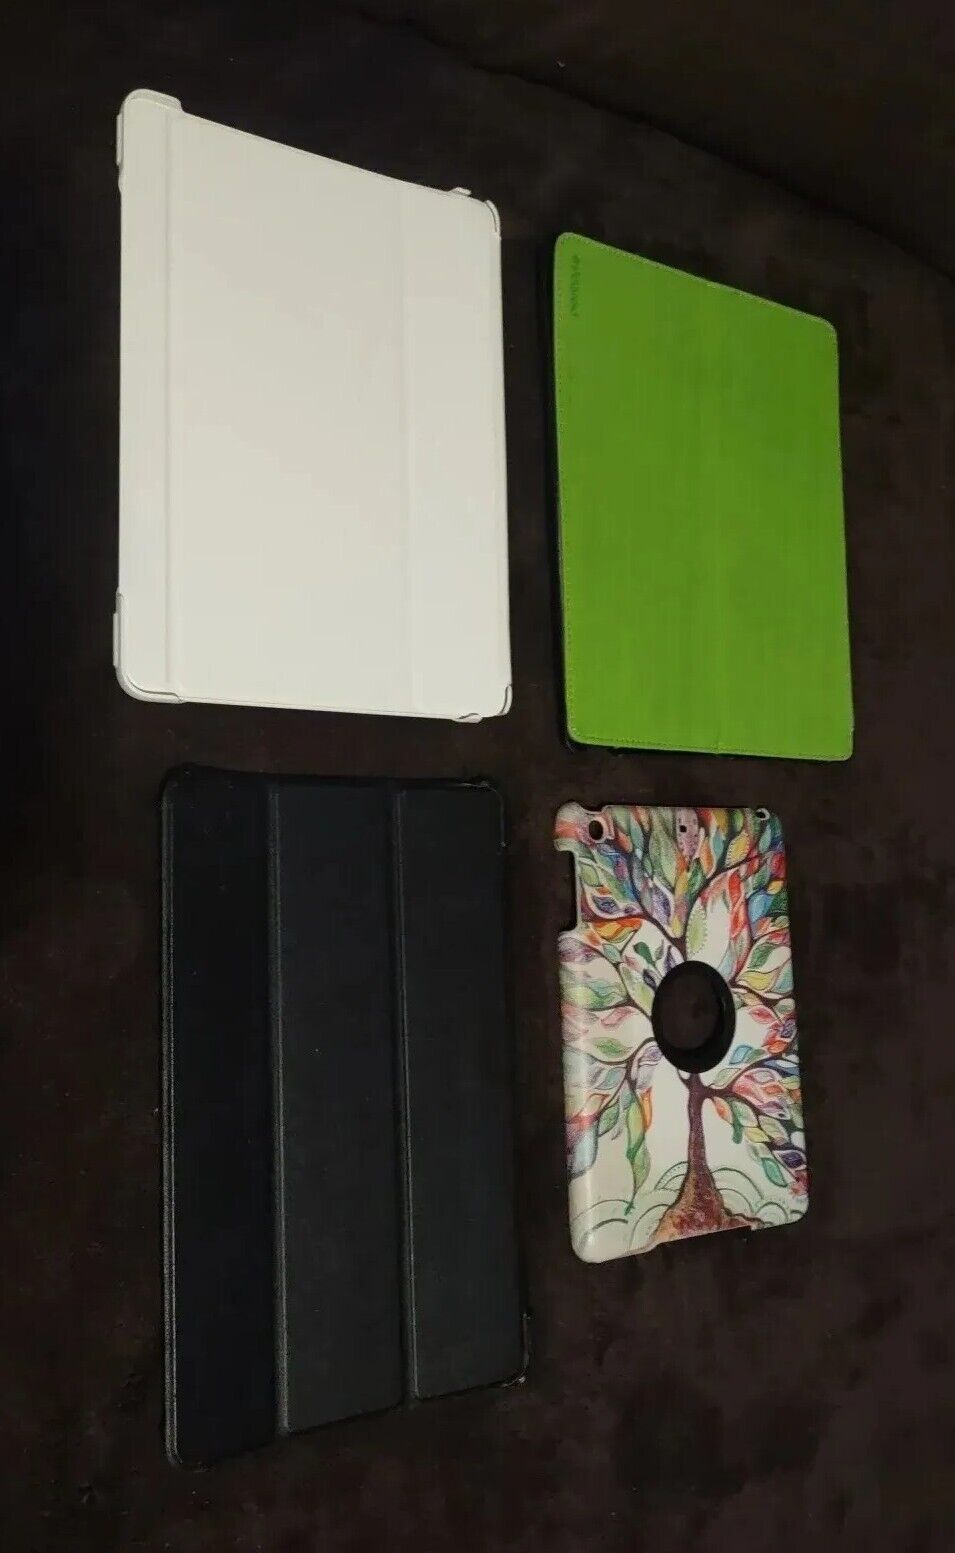 Lot of 4 Mixed Protective Cover Cases for varipus Notes, Tablets, Readers, IPADs